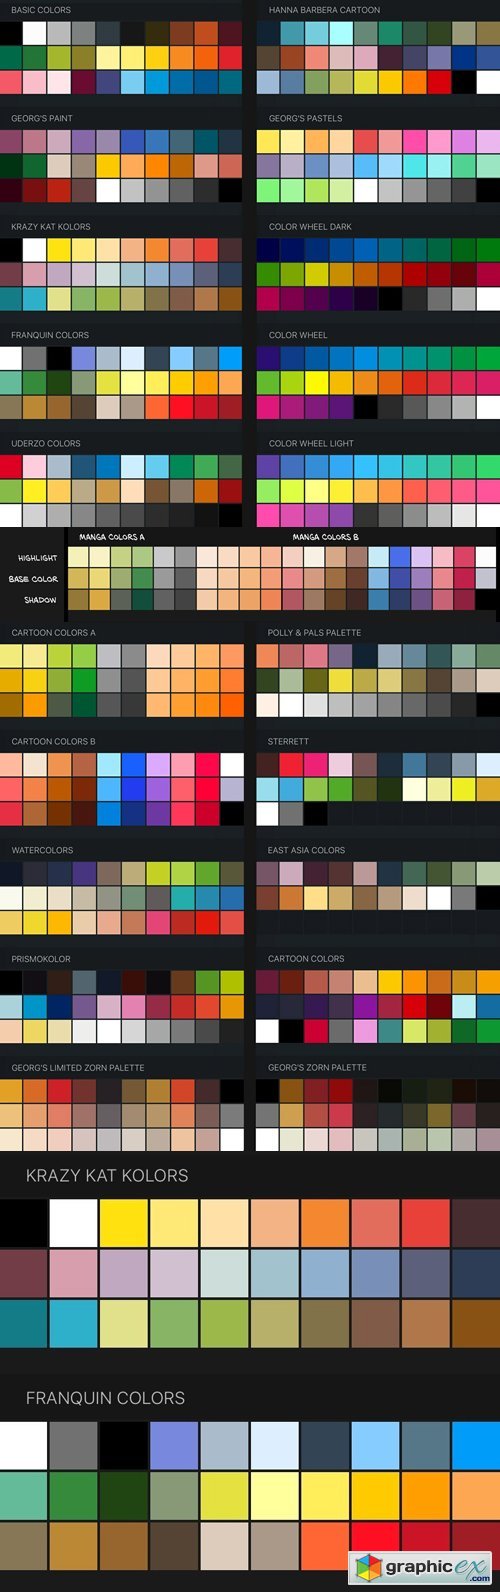 Procreate Color Swatches: 22 Palettes for Painting and Drawing